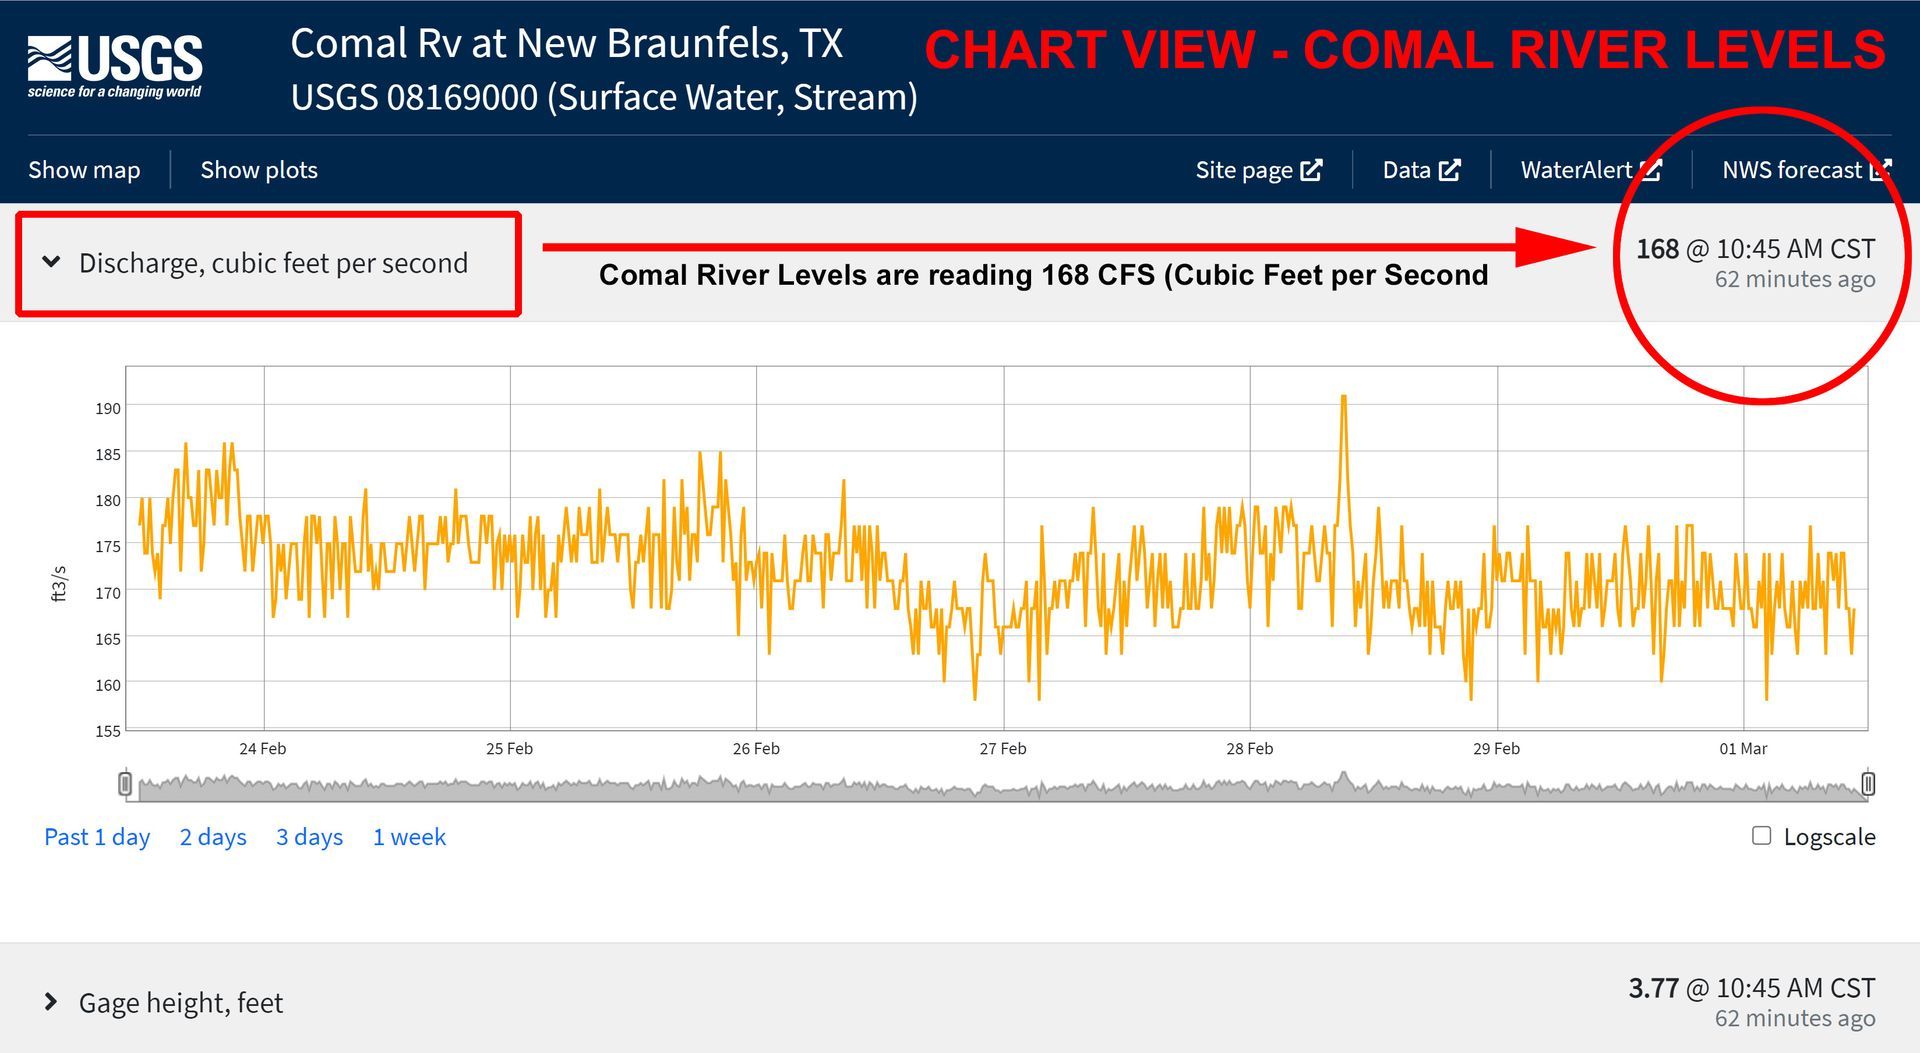 Chart View - Fluctuating Comal River Levels measured in CFS (cubic feet per second) flowing out of Comal Springs in Land Park in New Braunfels